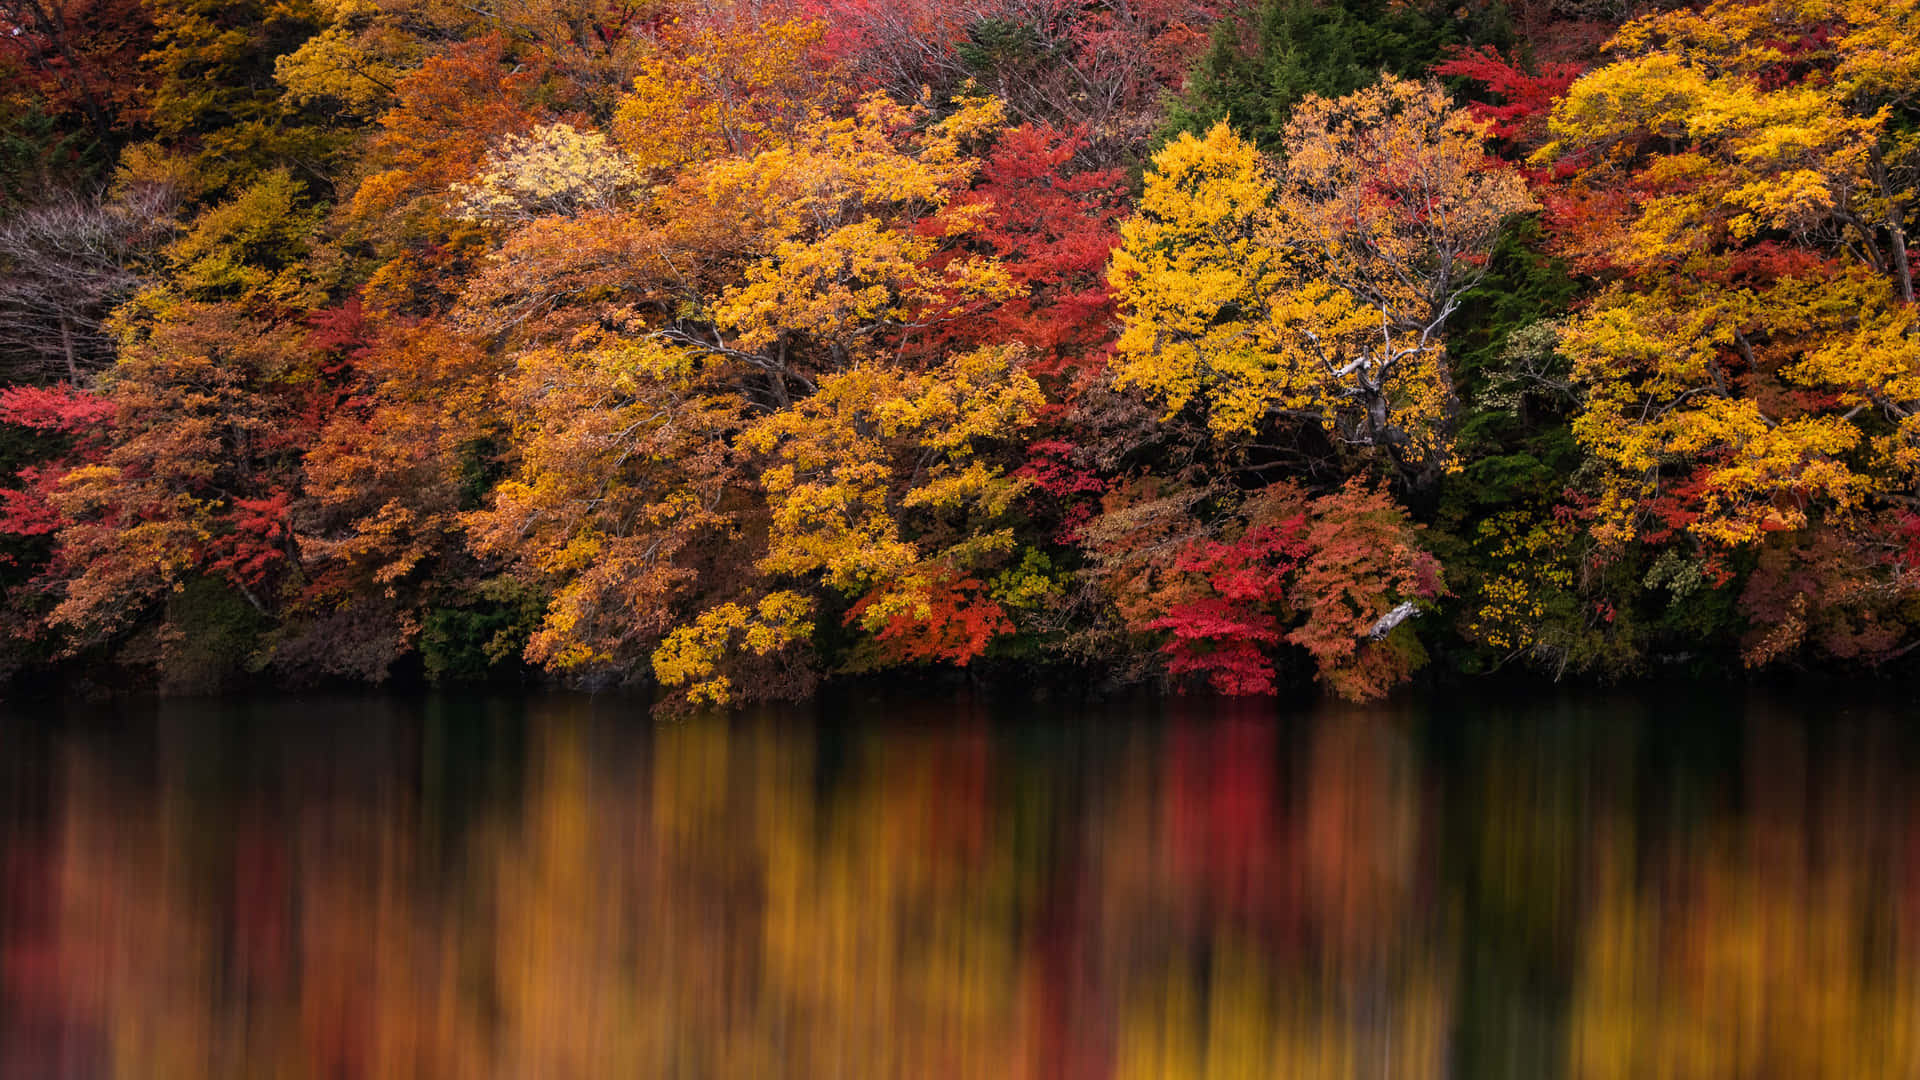 Enjoy the Colorful Changing of the Seasons with a 4k Fall Wallpaper